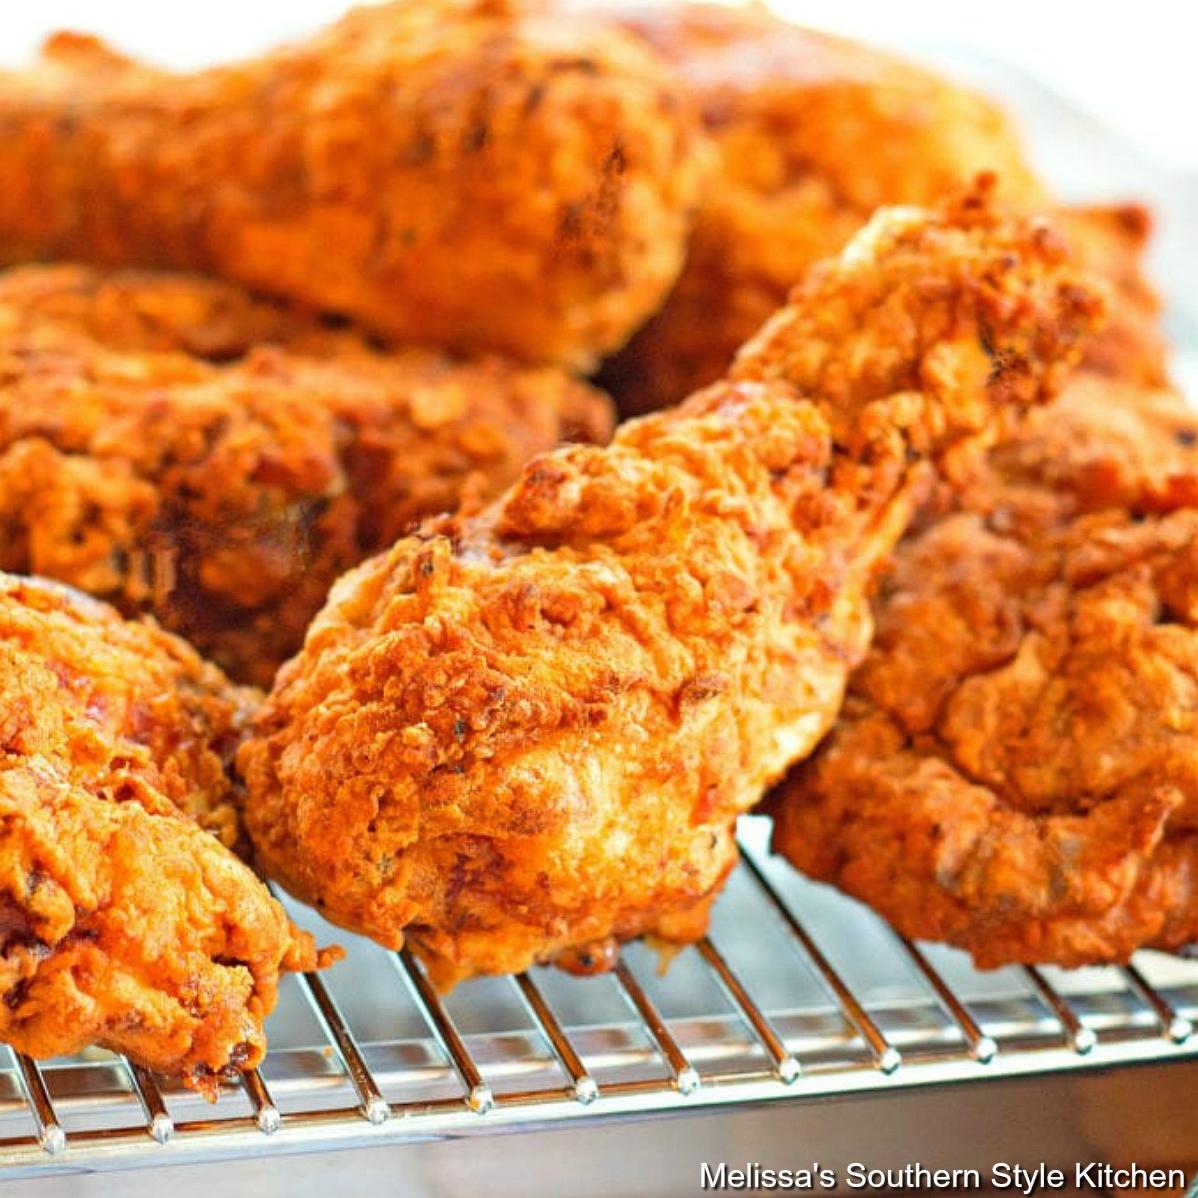  The key to great fried chicken? A perfect blend of spices and a little bit of love.